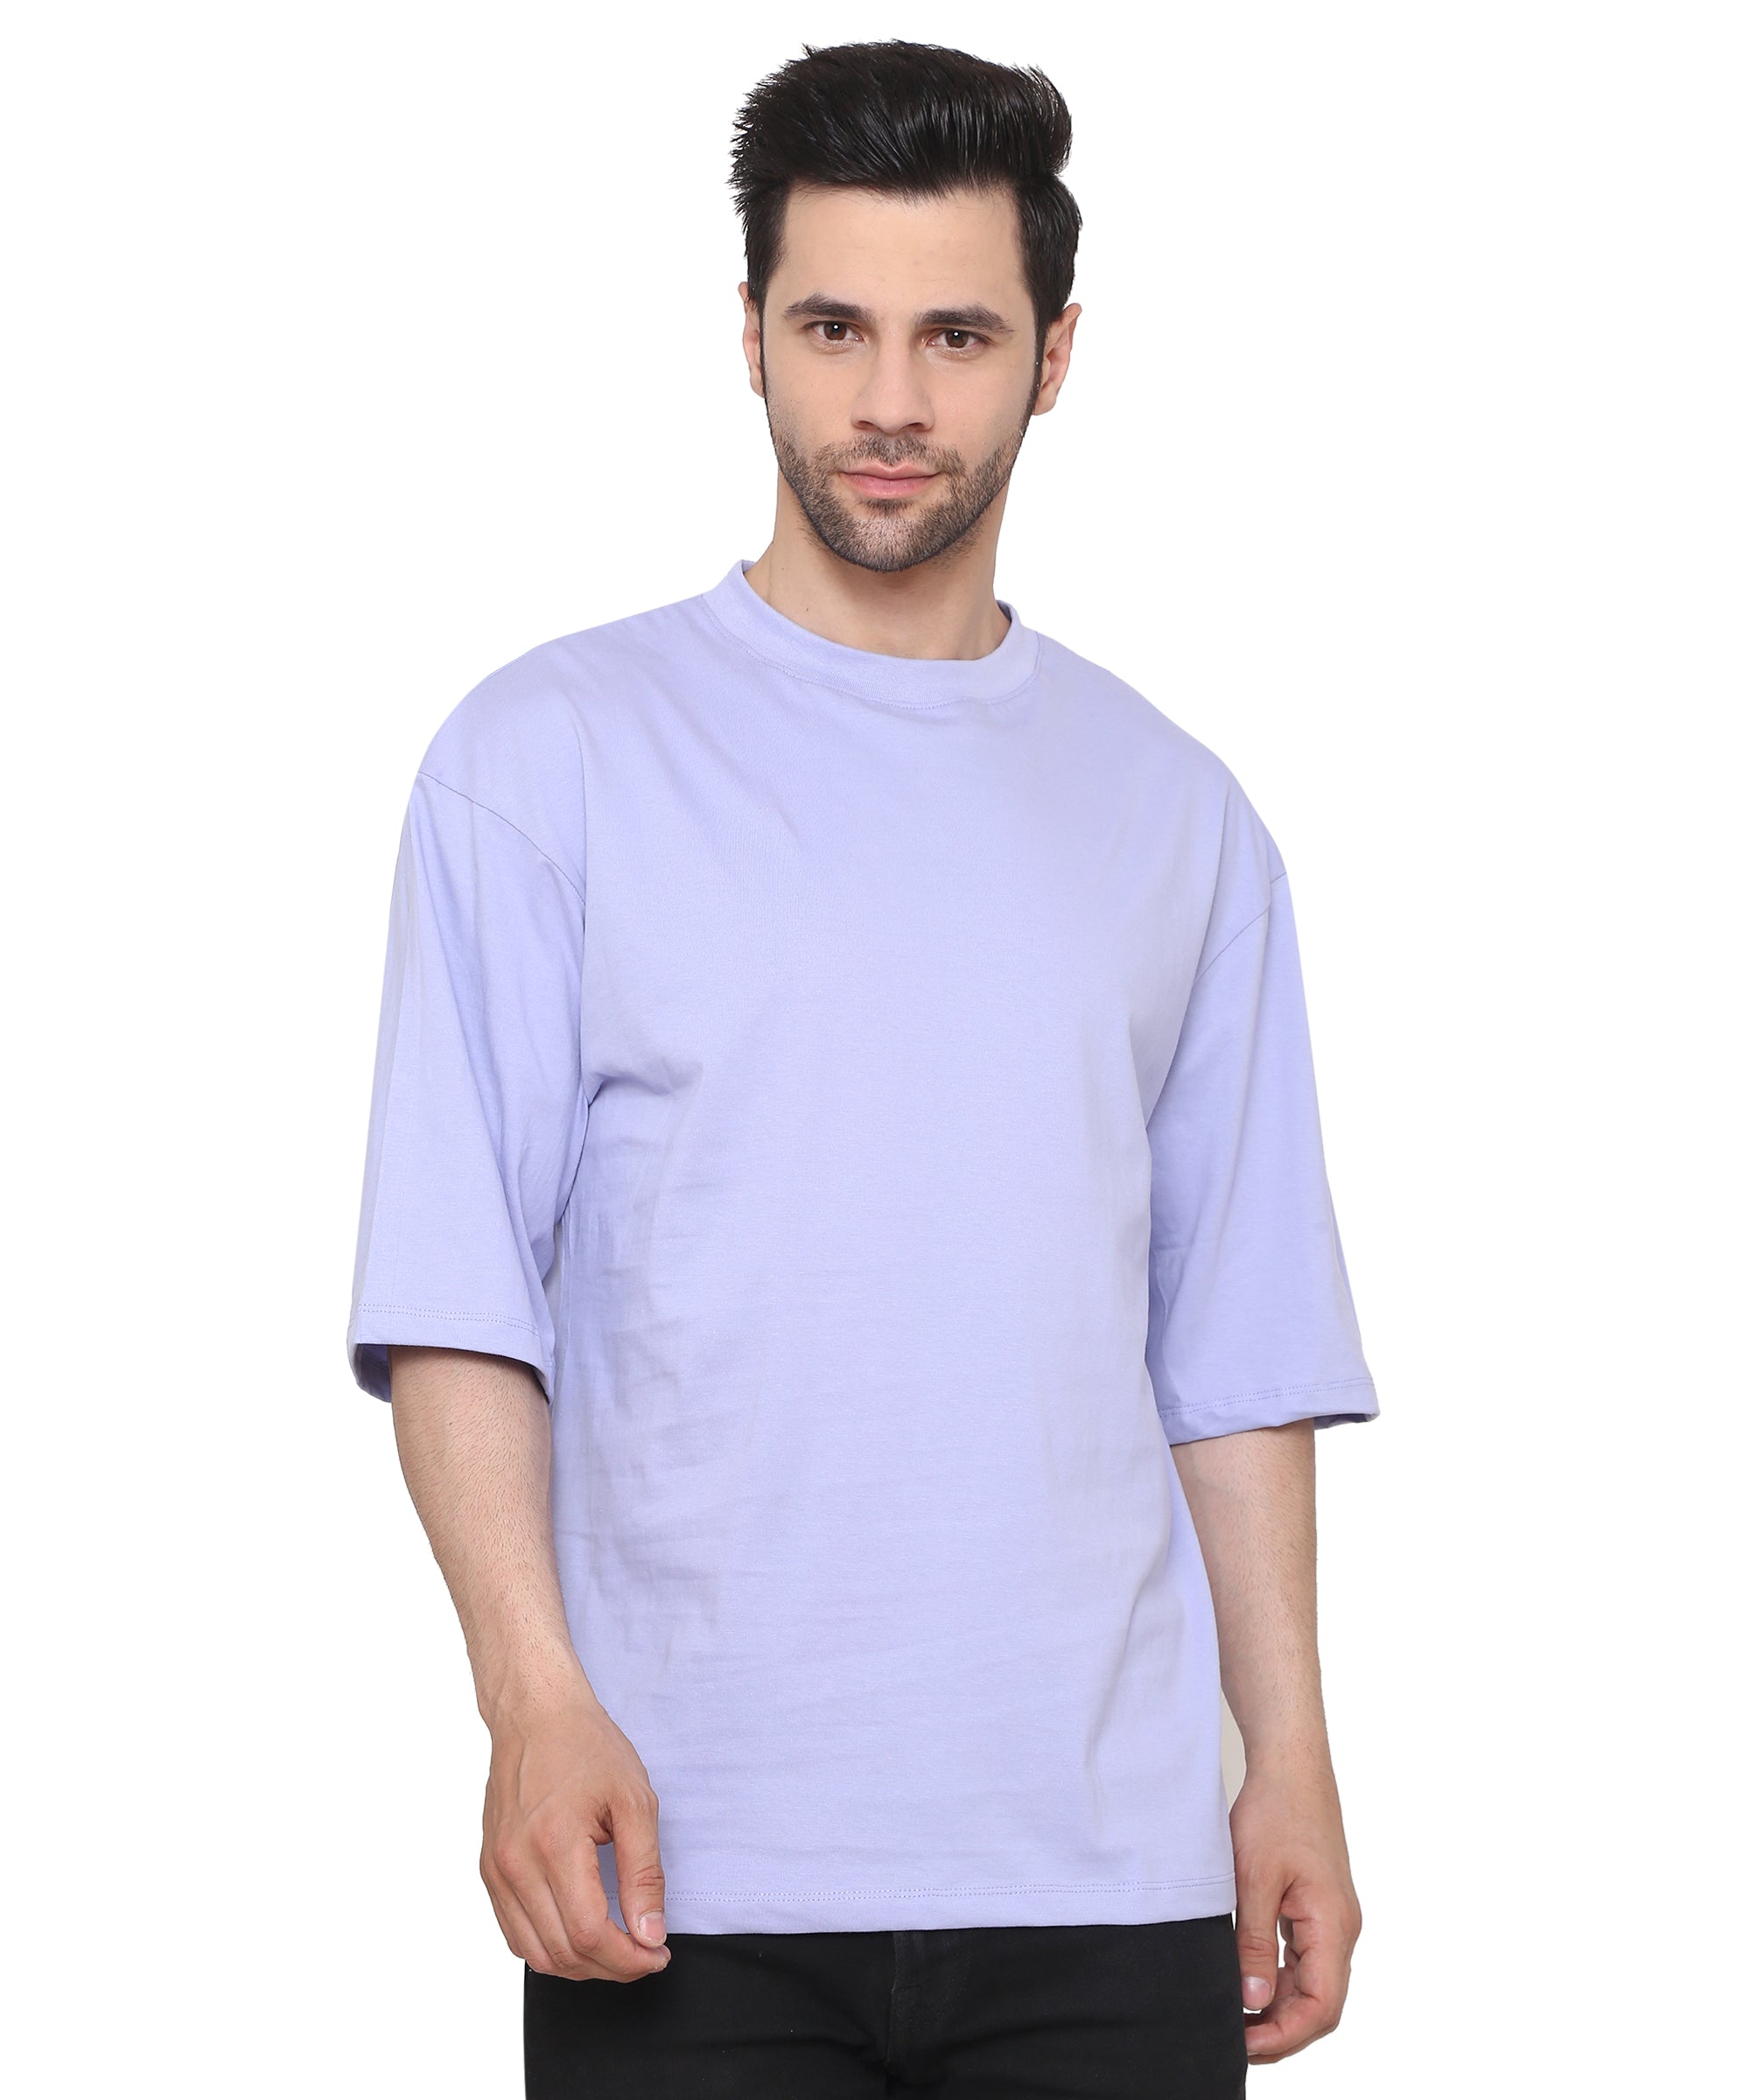 Light Lavender Oversized Cotton T-shirts Relaxed Fit Tees for Men